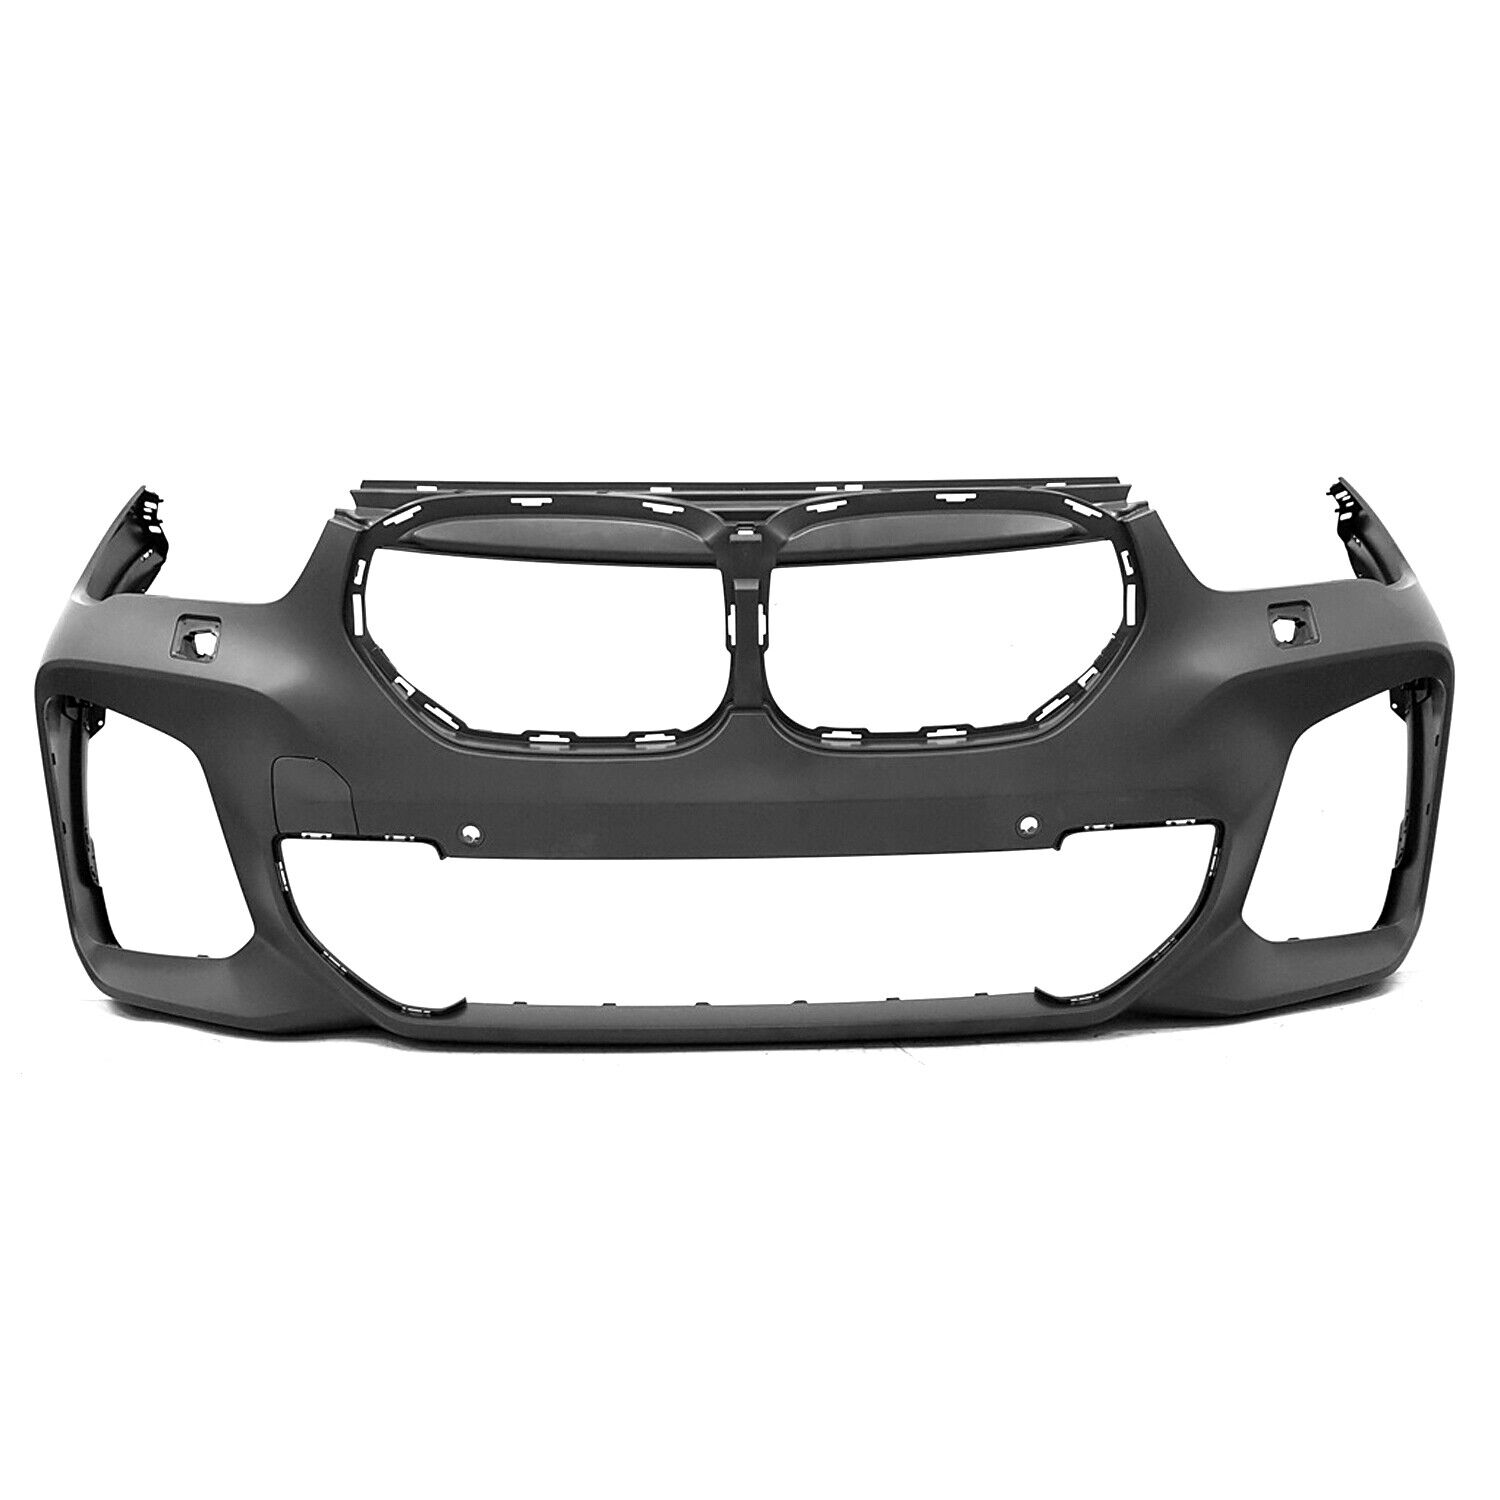 Fits 2020-2022 BMW X1 New Replacement Front Bumper Cover